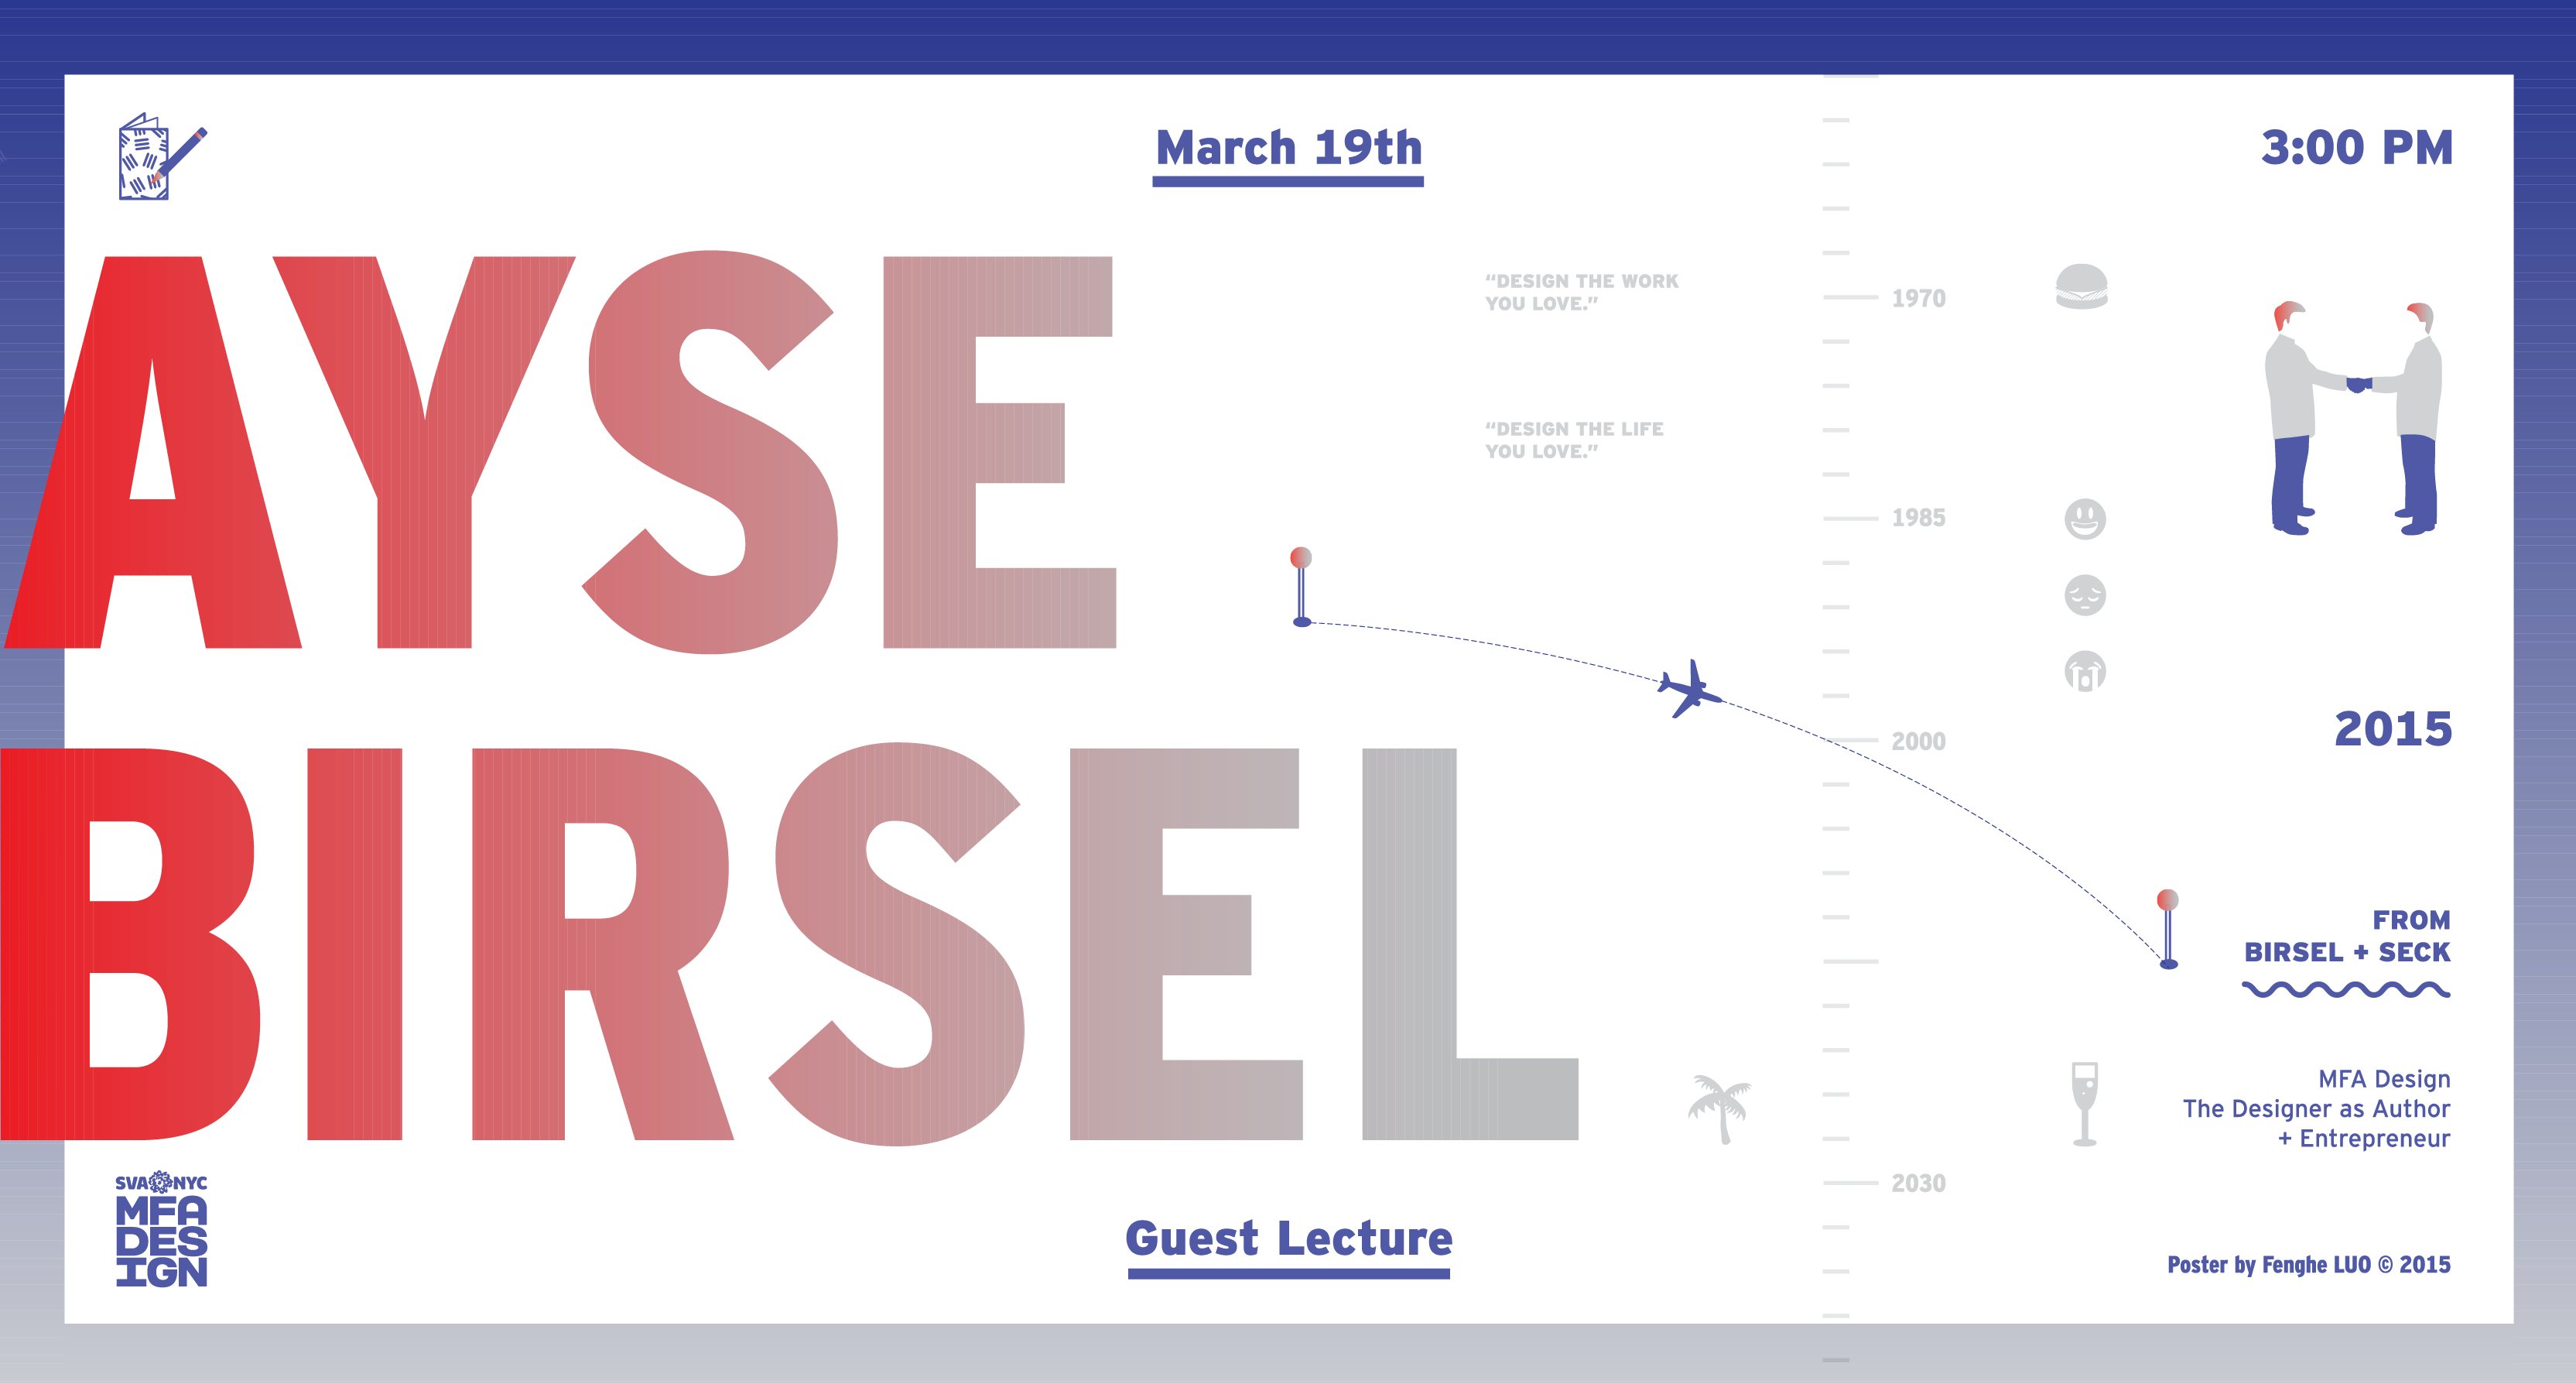 An infographic poster showing pictograms of a human, a plane, a tree and having the title: Ayse Birsel Guest Lecture.